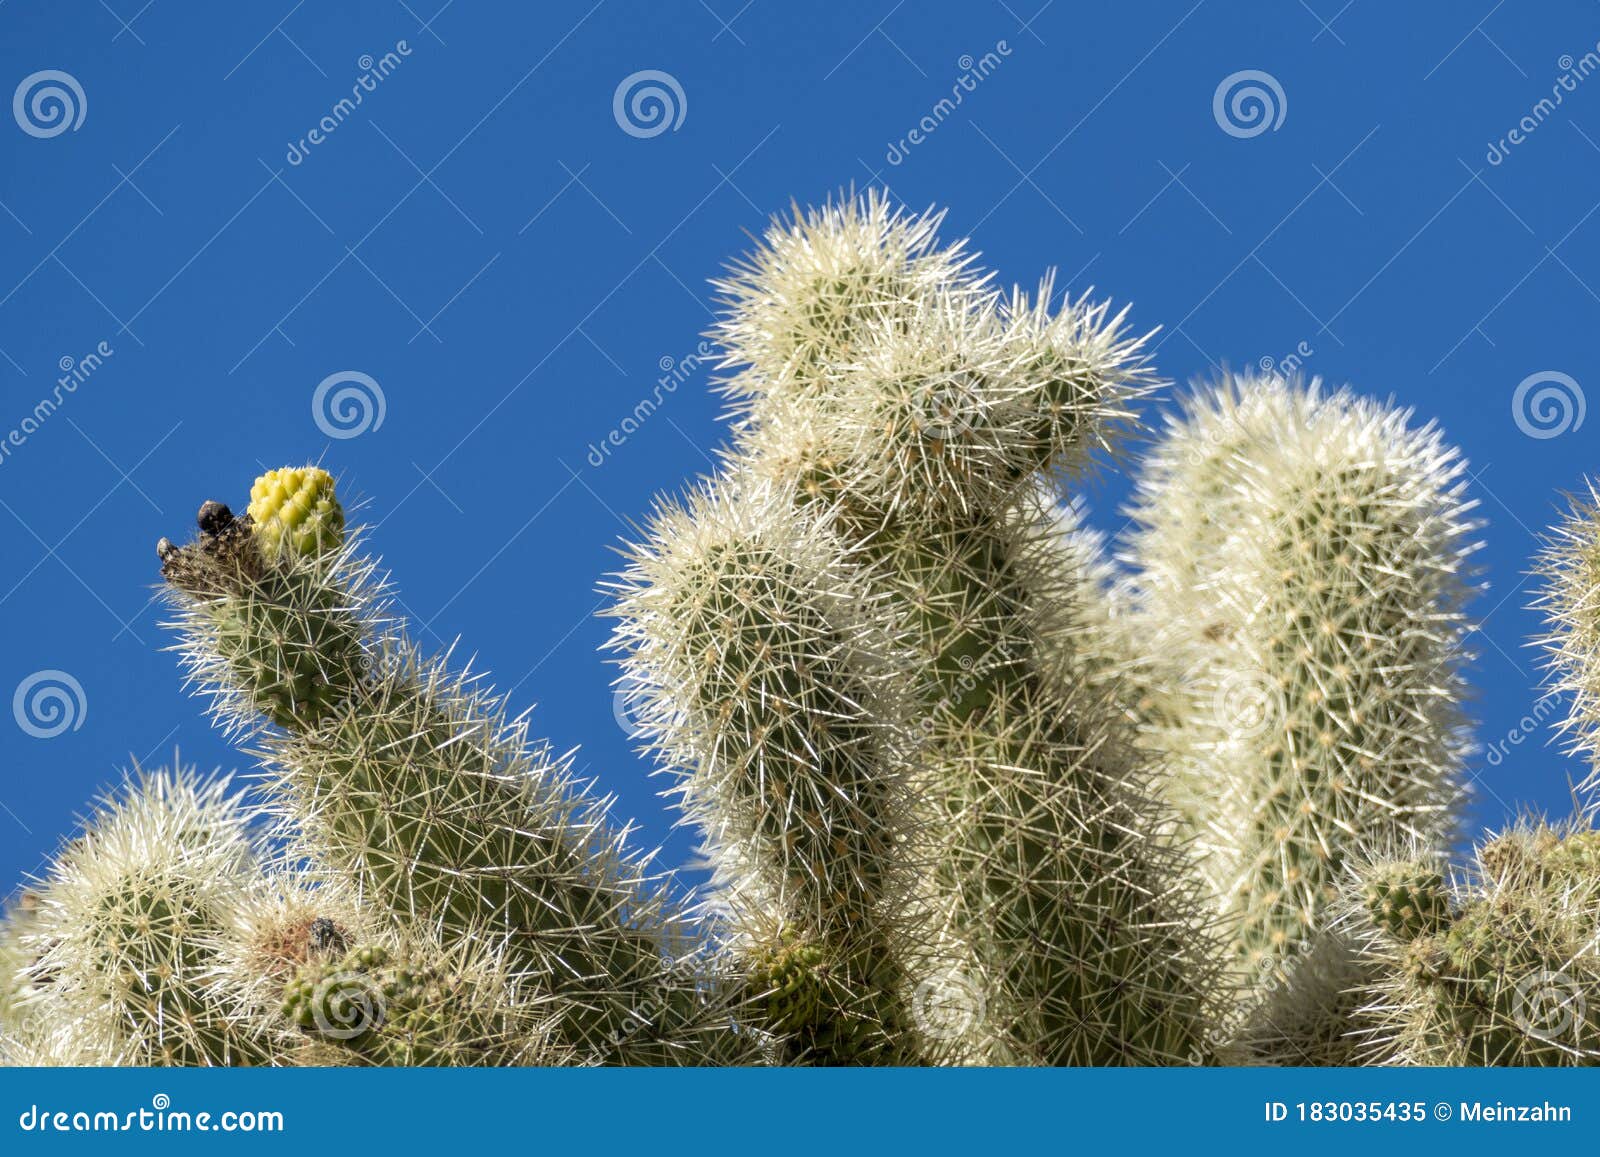 Cacti of Arizonaâ€™s Sonoran Desert Stand Like a Vast, Silent Army at ...